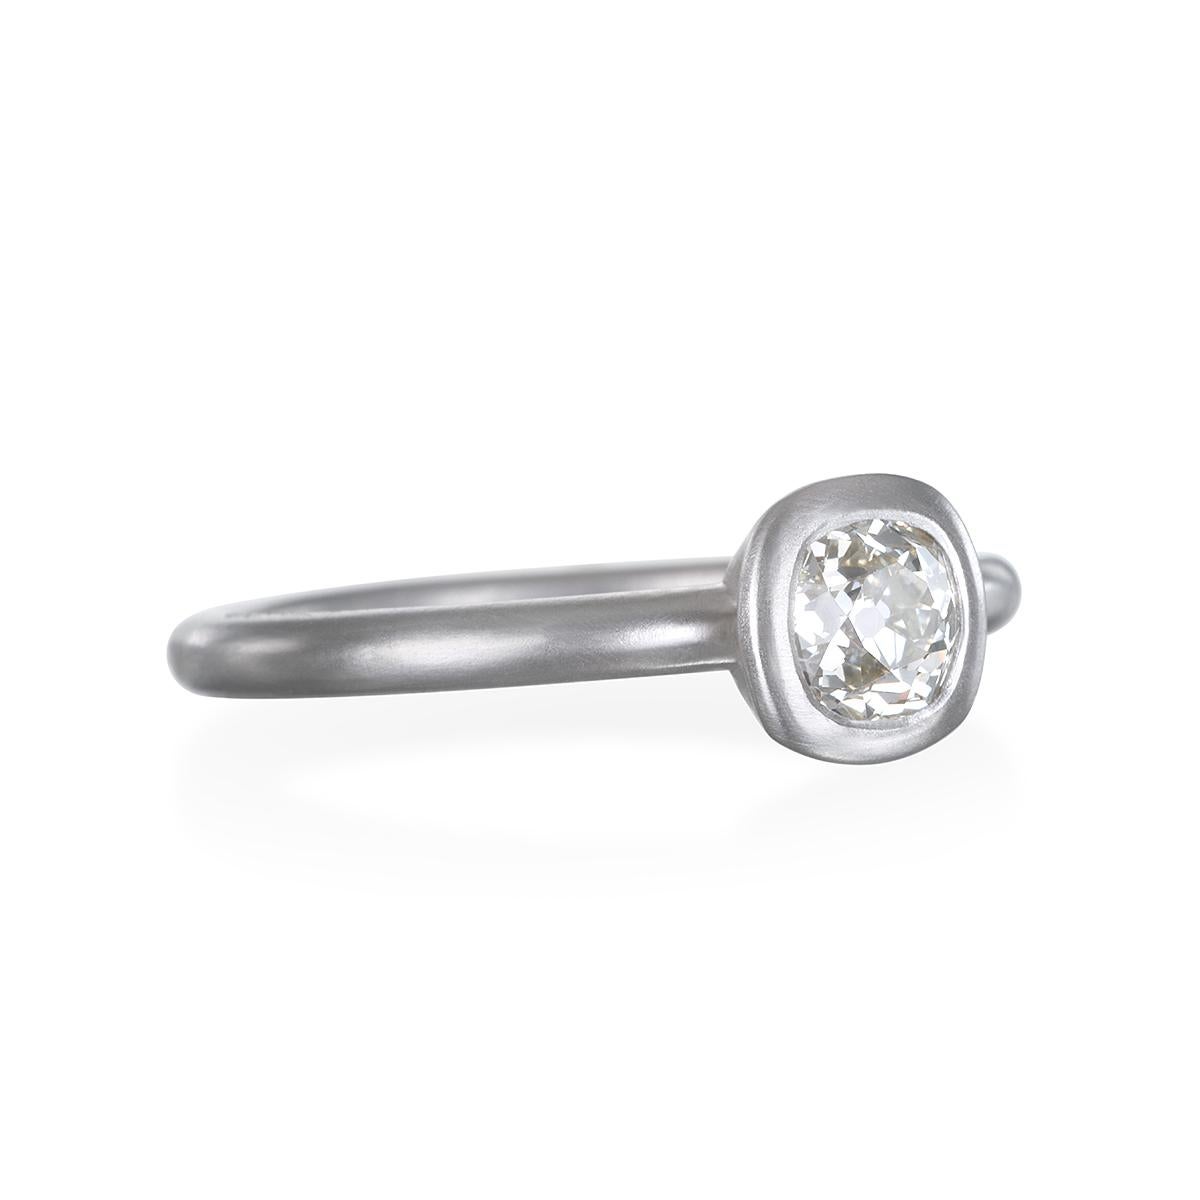 Offering classic yet contemporary appeal, this platinum ring, with its matte finish, is bezel set with an open gallery and can be easily stacked.
Mix and match to create your own style. 

Size 6.75 Ring can be sized.
Diamond: Old European Cushion